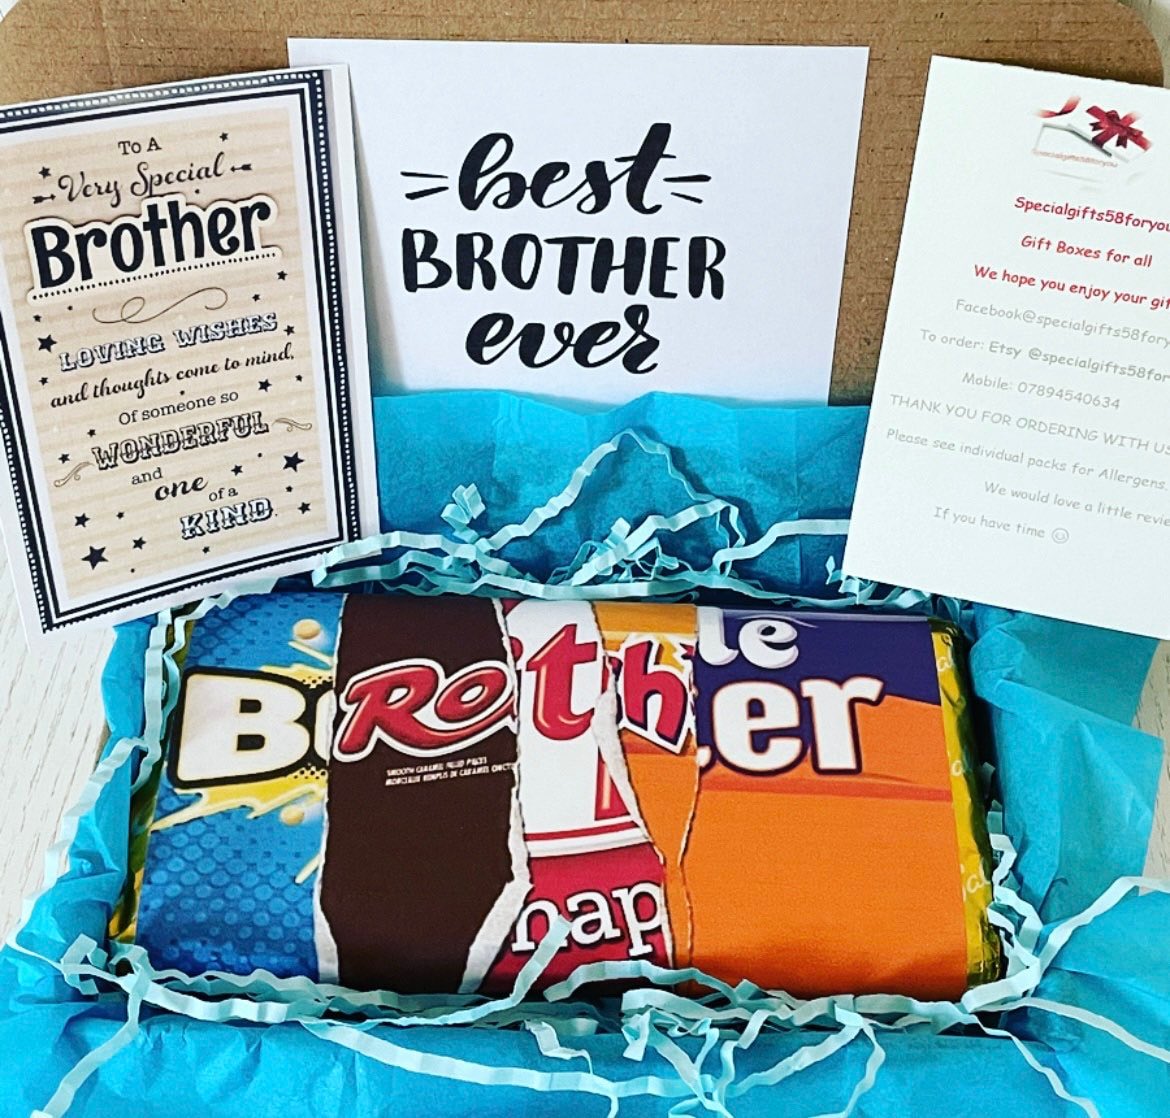 Lovely personalised brother gift. 
Gift for him. Big brother, little brother, best brother. Birthday gift, cheer up gift. 

ktspecialgifts.etsy.com/listing/107934…

#brothergift #giftforhim #bestbrother #bigbrother #birthday #personalised 
#promotedtobigbrother